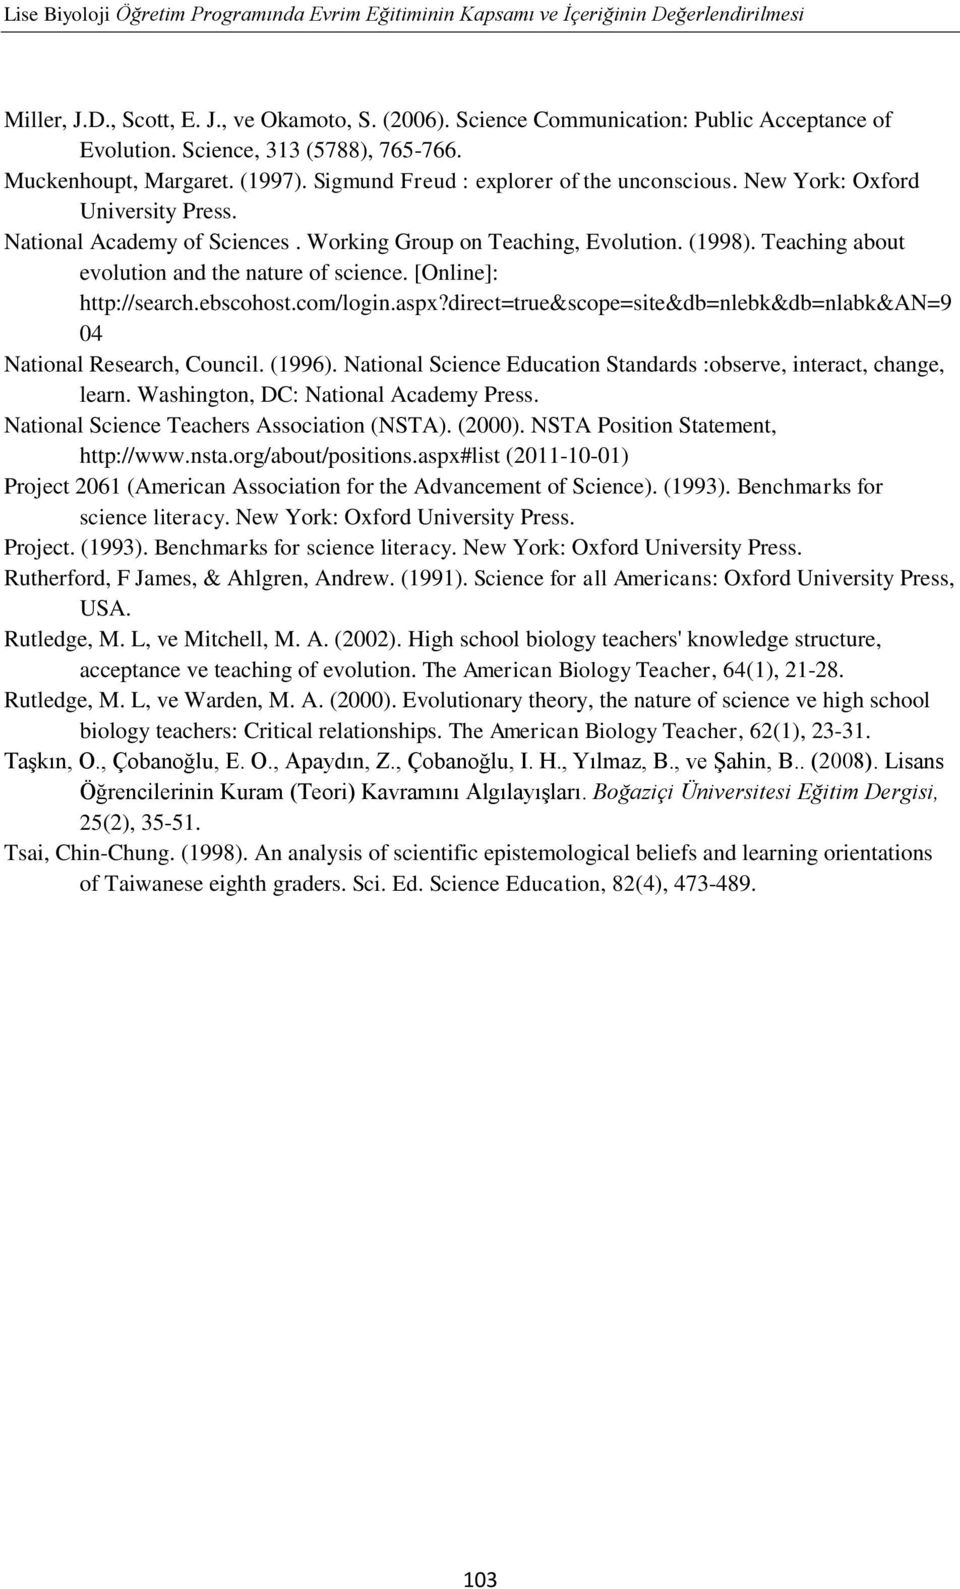 Working Group on Teaching, Evolution. (1998). Teaching about evolution and the nature of science. [Online]: http://search.ebscohost.com/login.aspx?